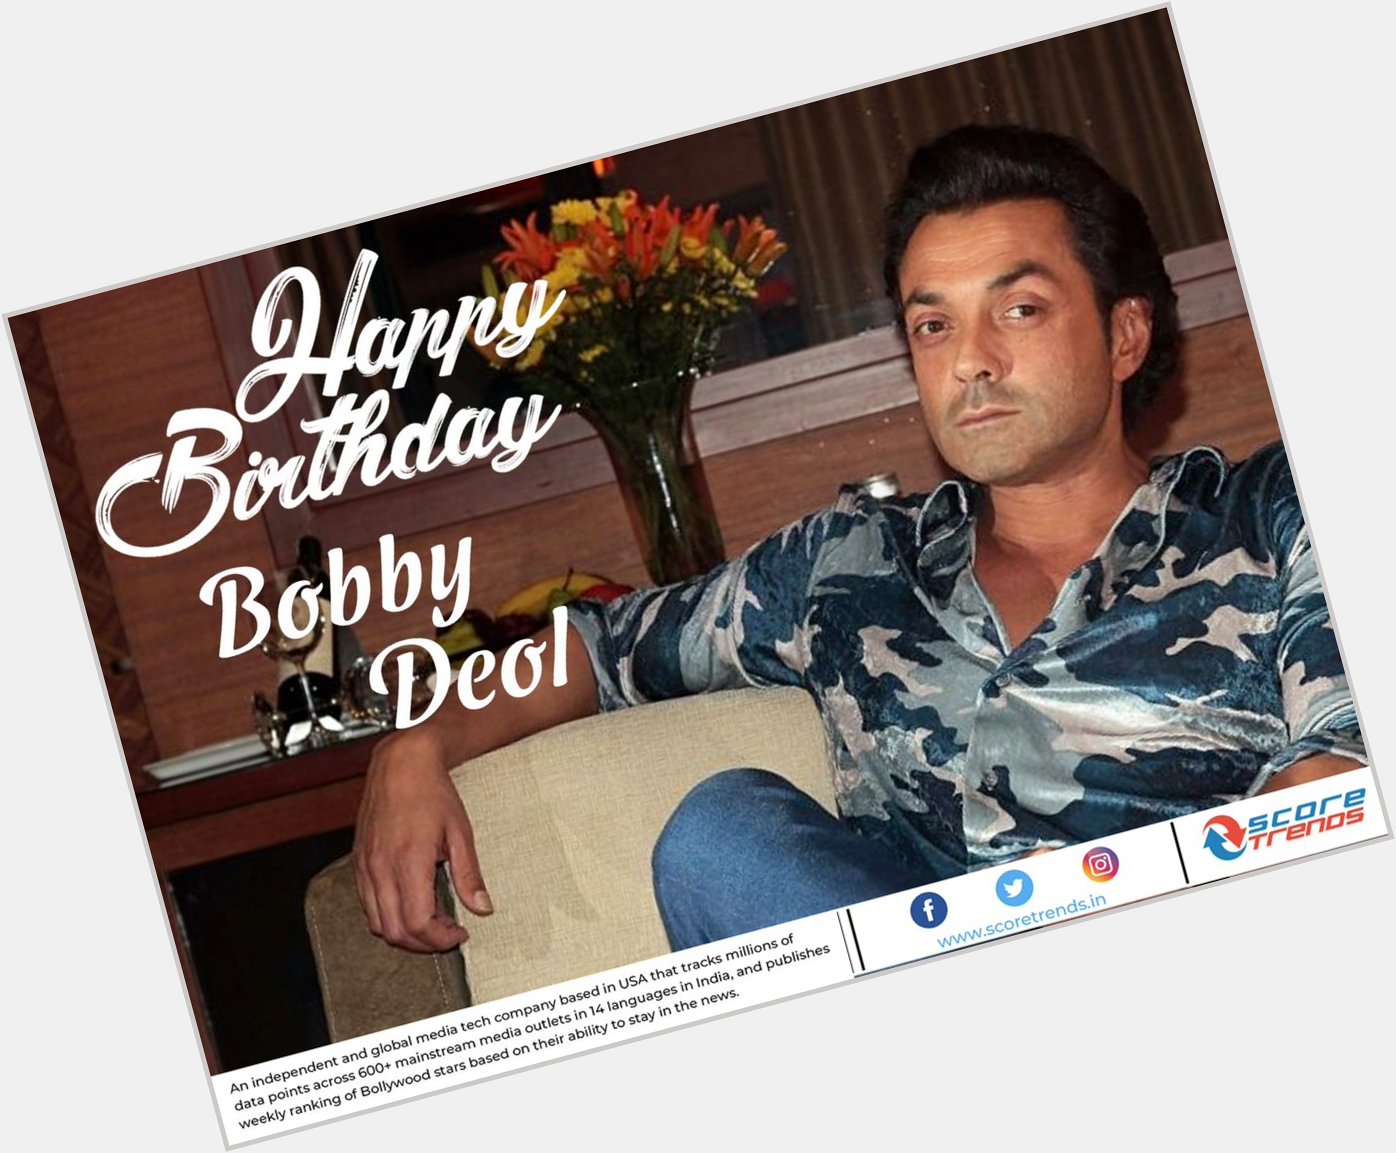 Score Trends wishes Bobby Deol a Happy Birthday!! 